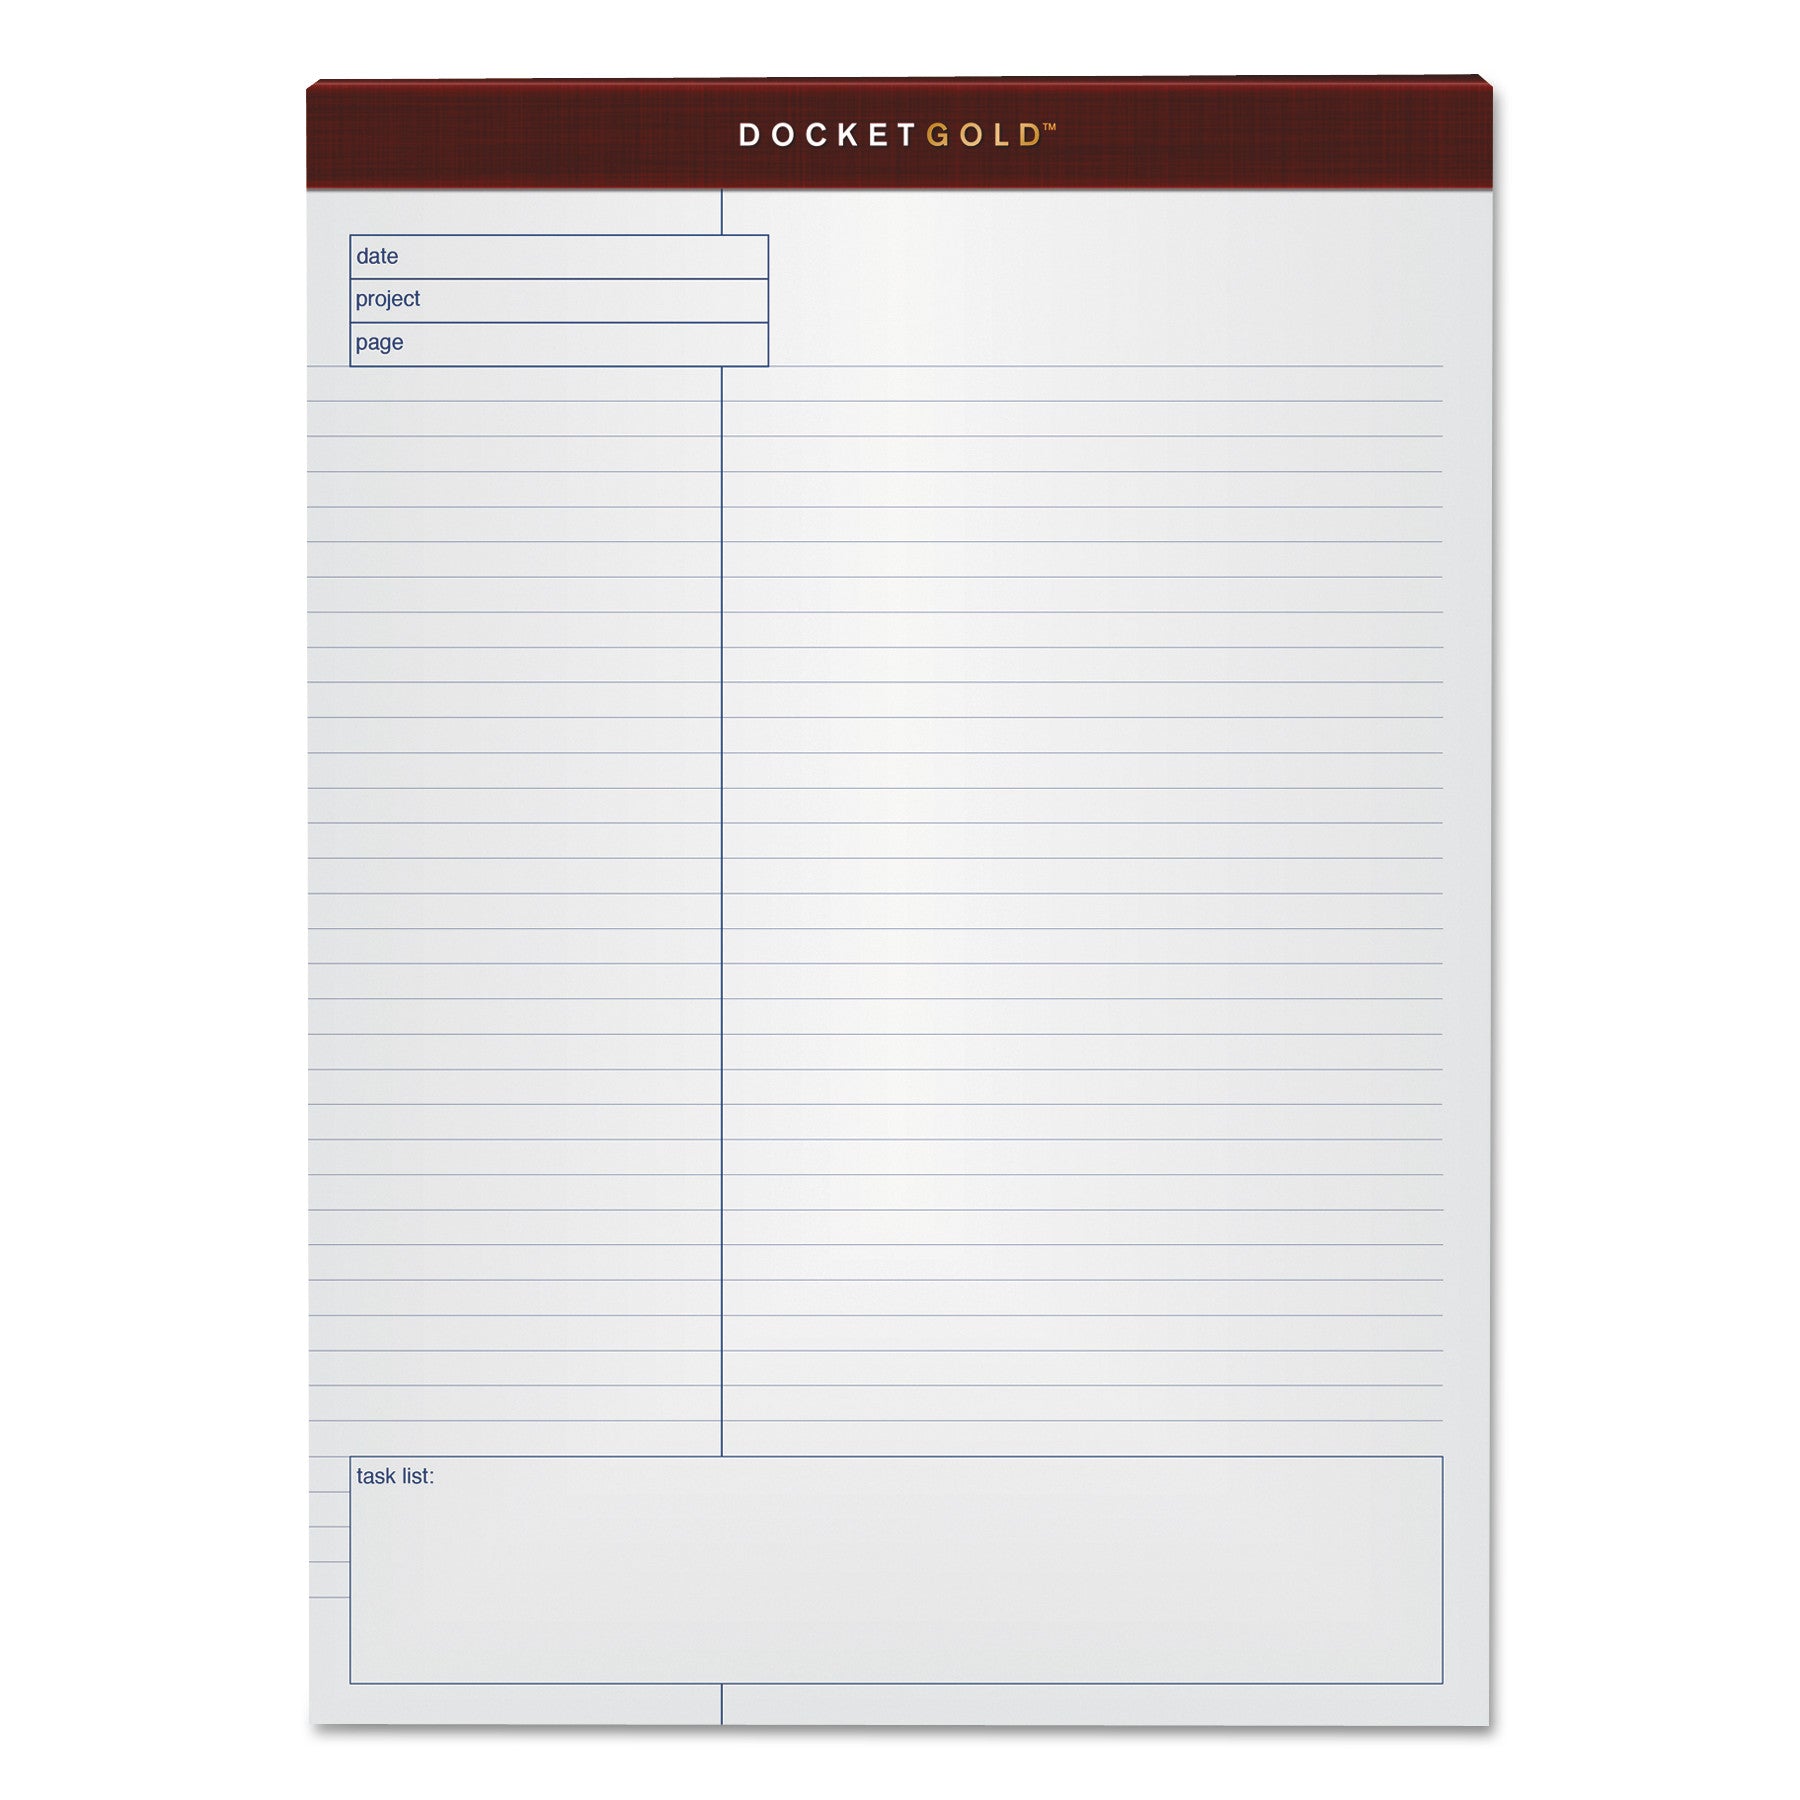 Docket Gold Planning Pads, Project-Management Format, Quadrille Rule (4 sq/in), 40 White 8.5 x 11.75 Sheets, 4/Pack - 